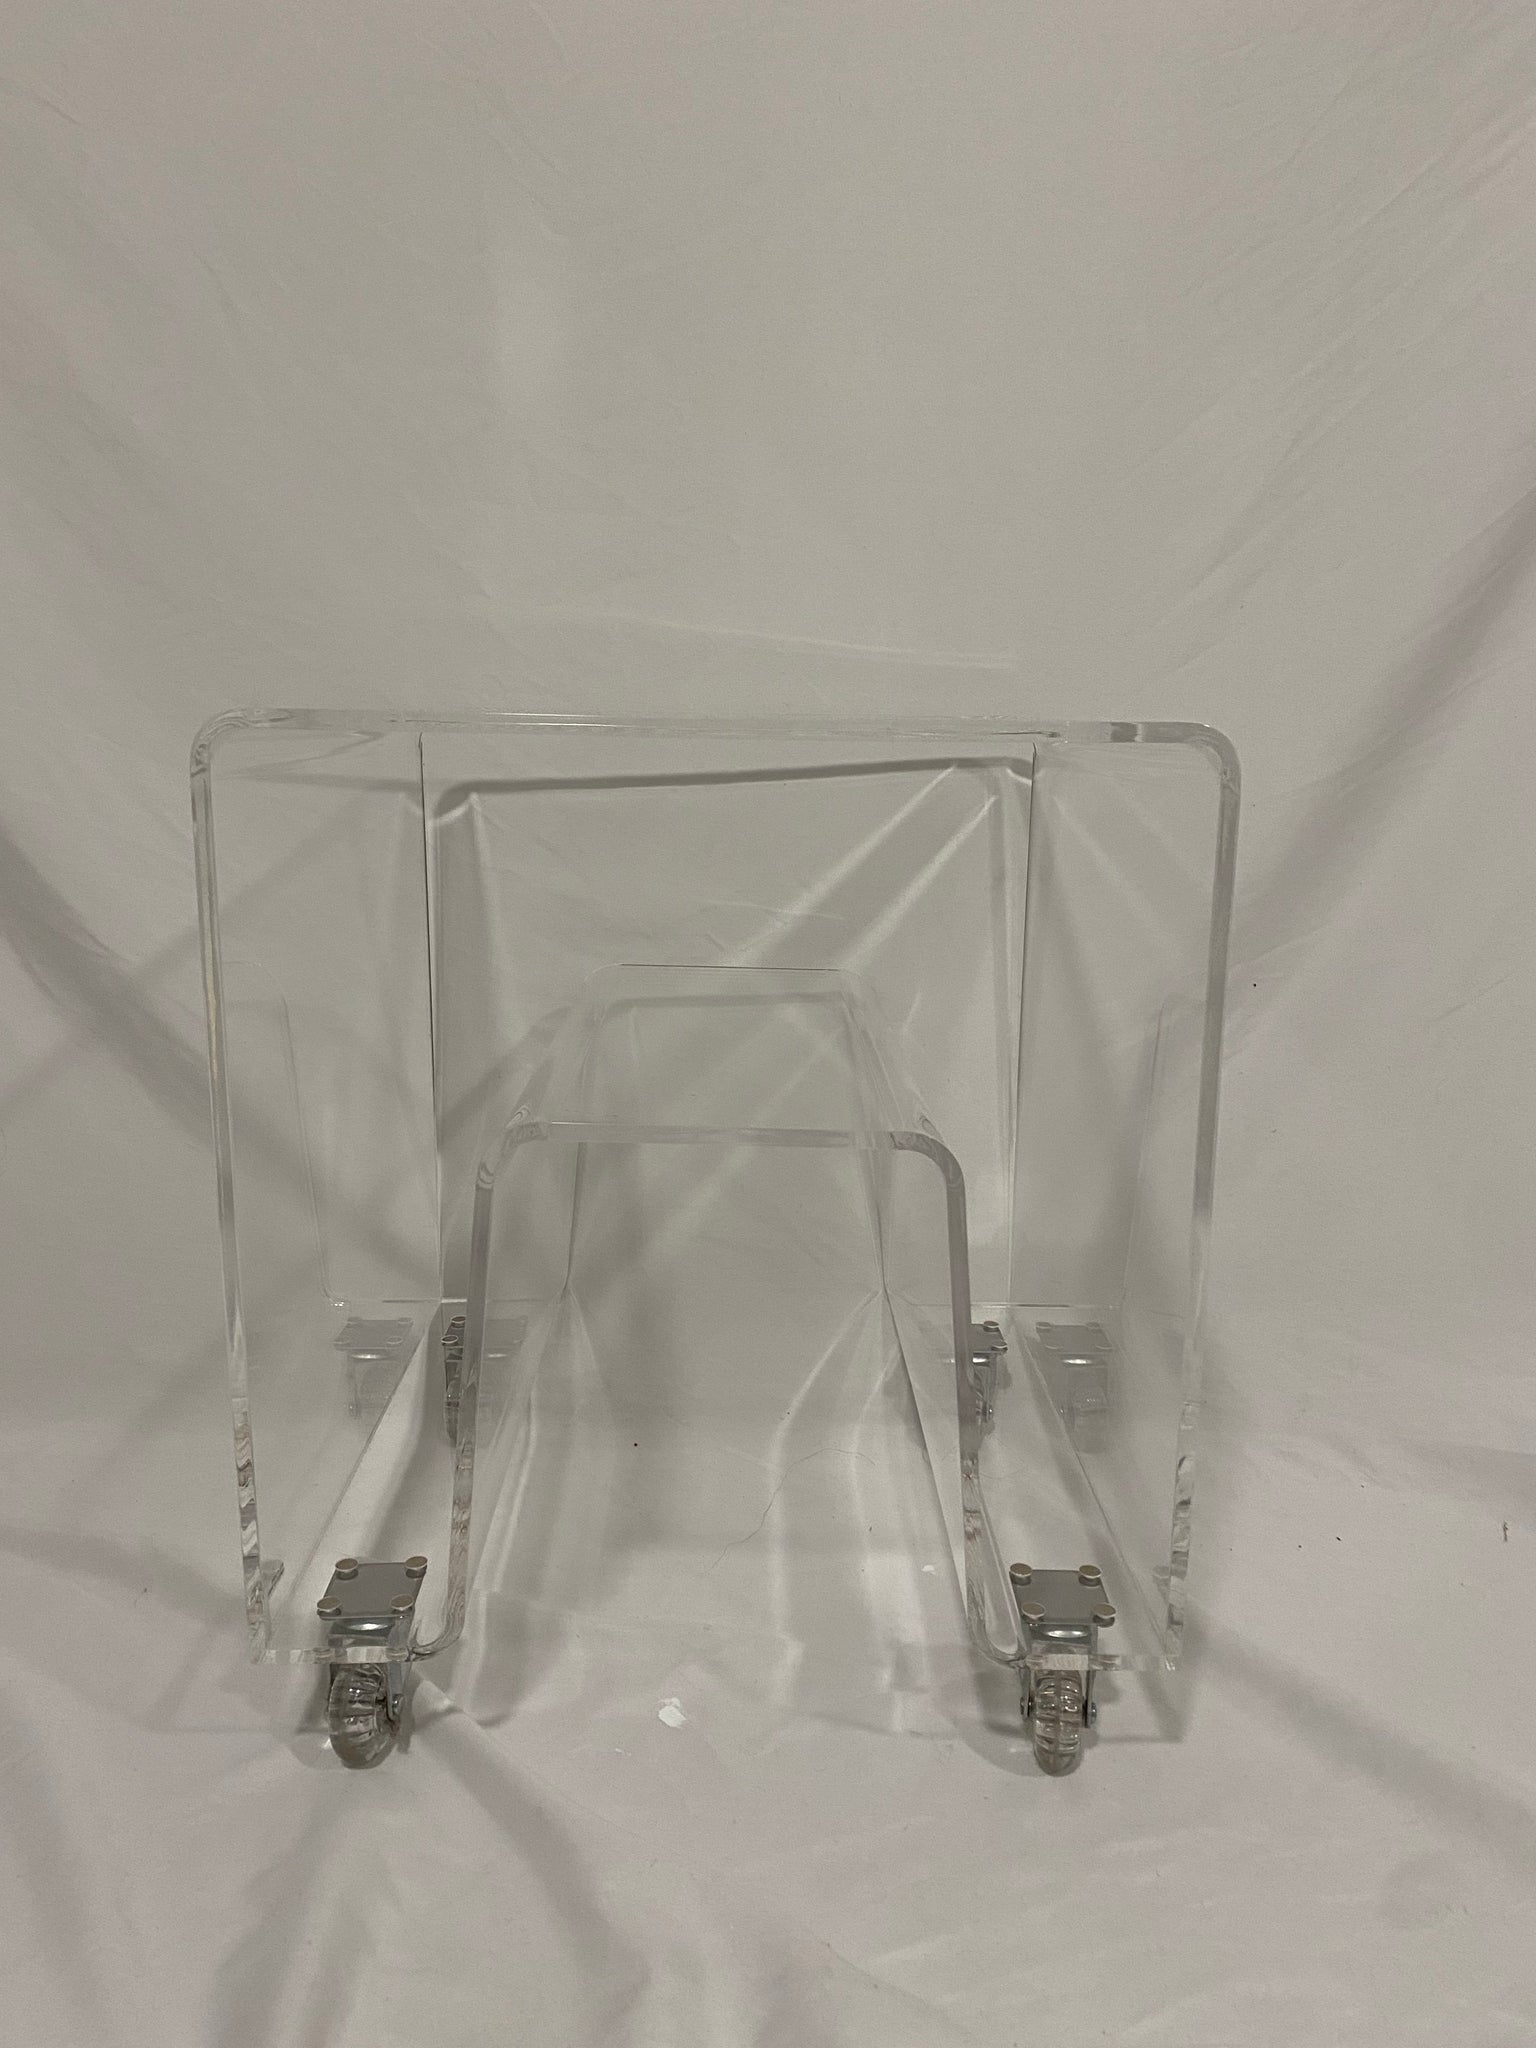 Small lucite table on wheels